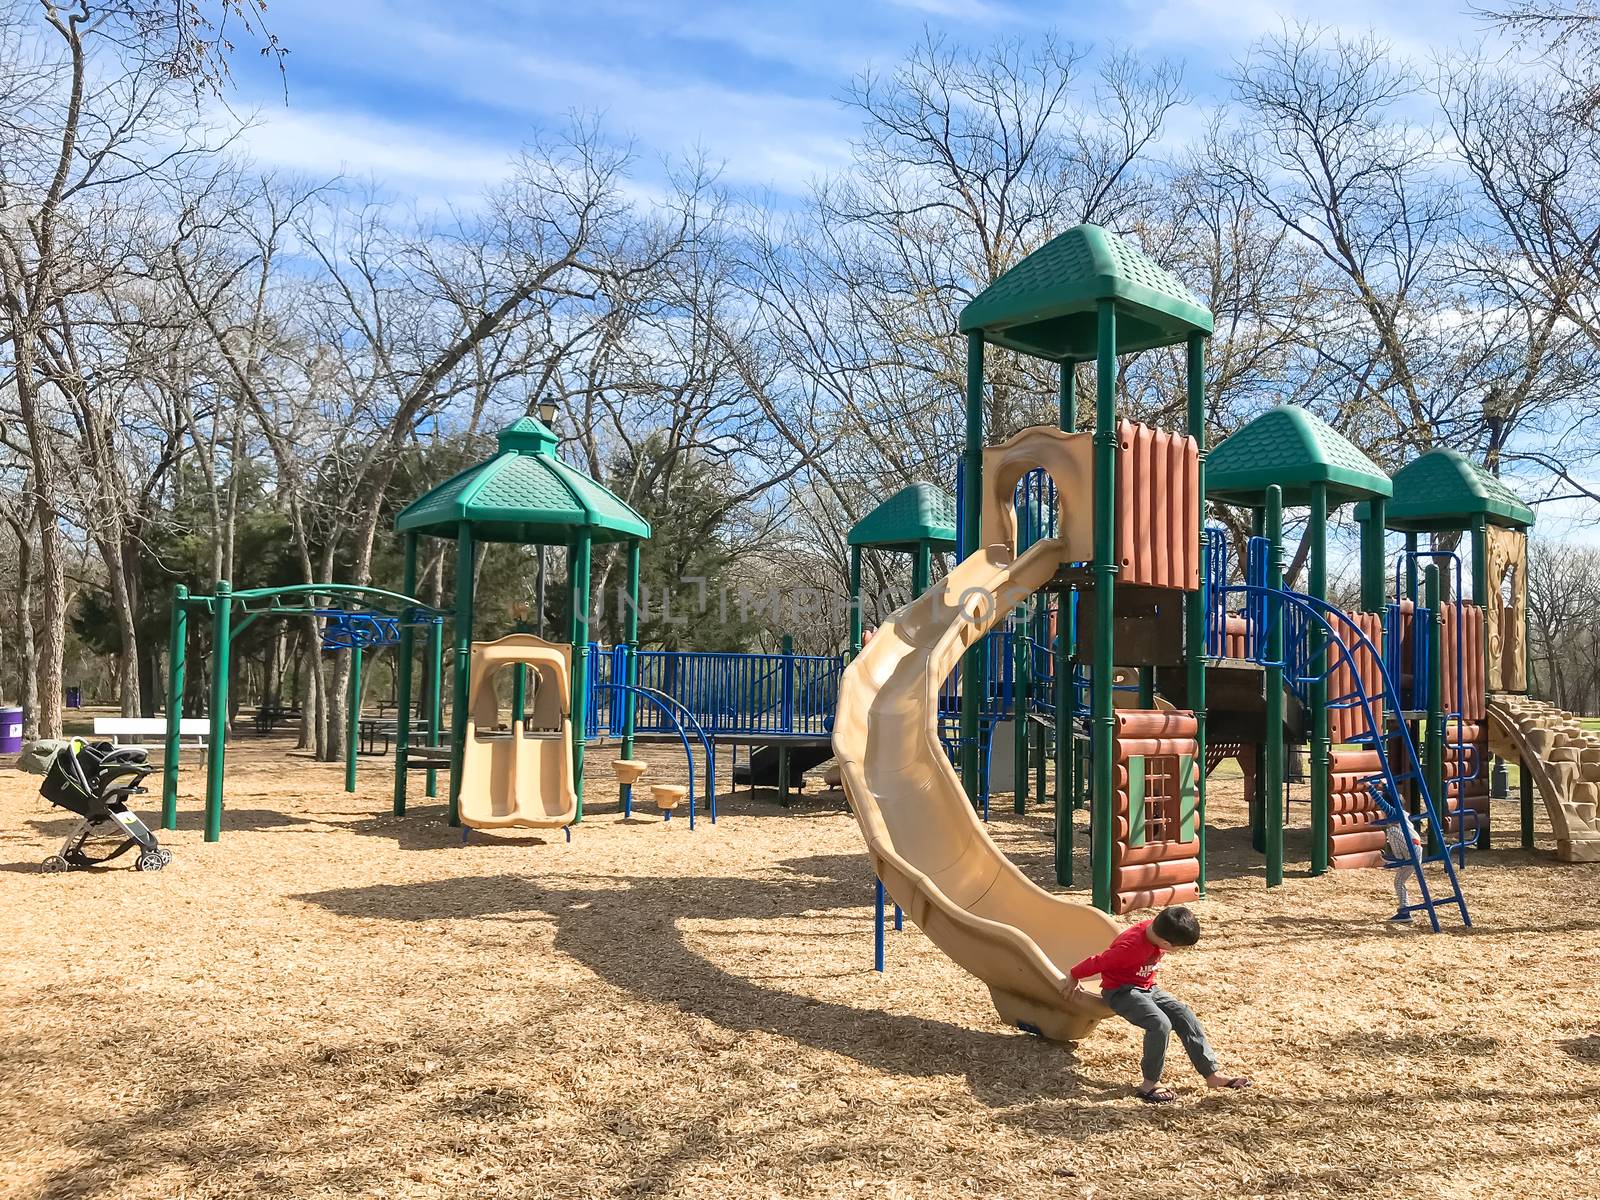 Outdoor playground with children playing wintertime in North Texas, America by trongnguyen